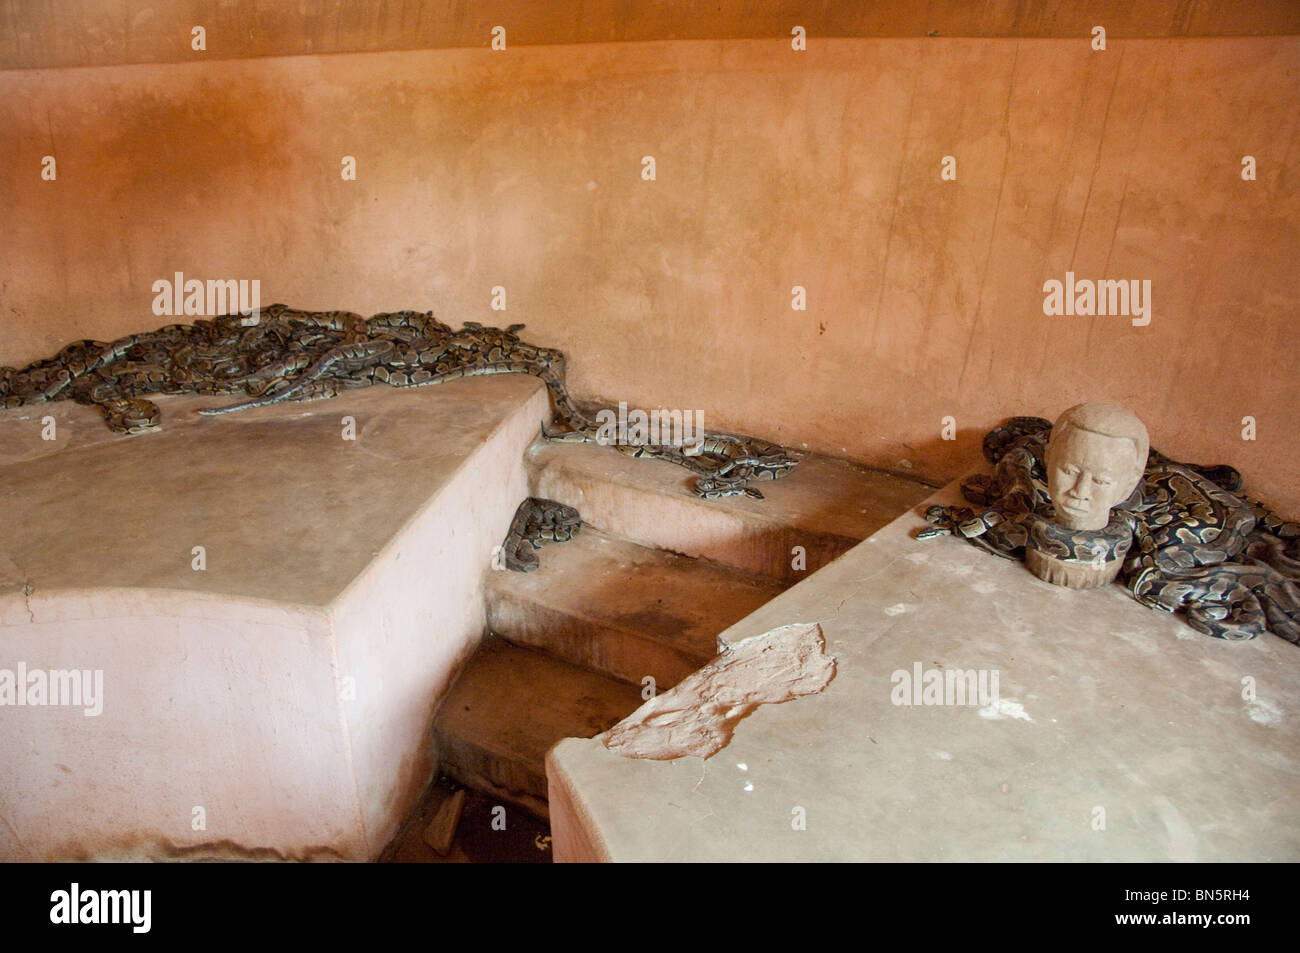 Africa, Benin, Ouidah. Temple of the Pythons shrine connected with voodoo snake cult. Temple interior with pythons. Stock Photo